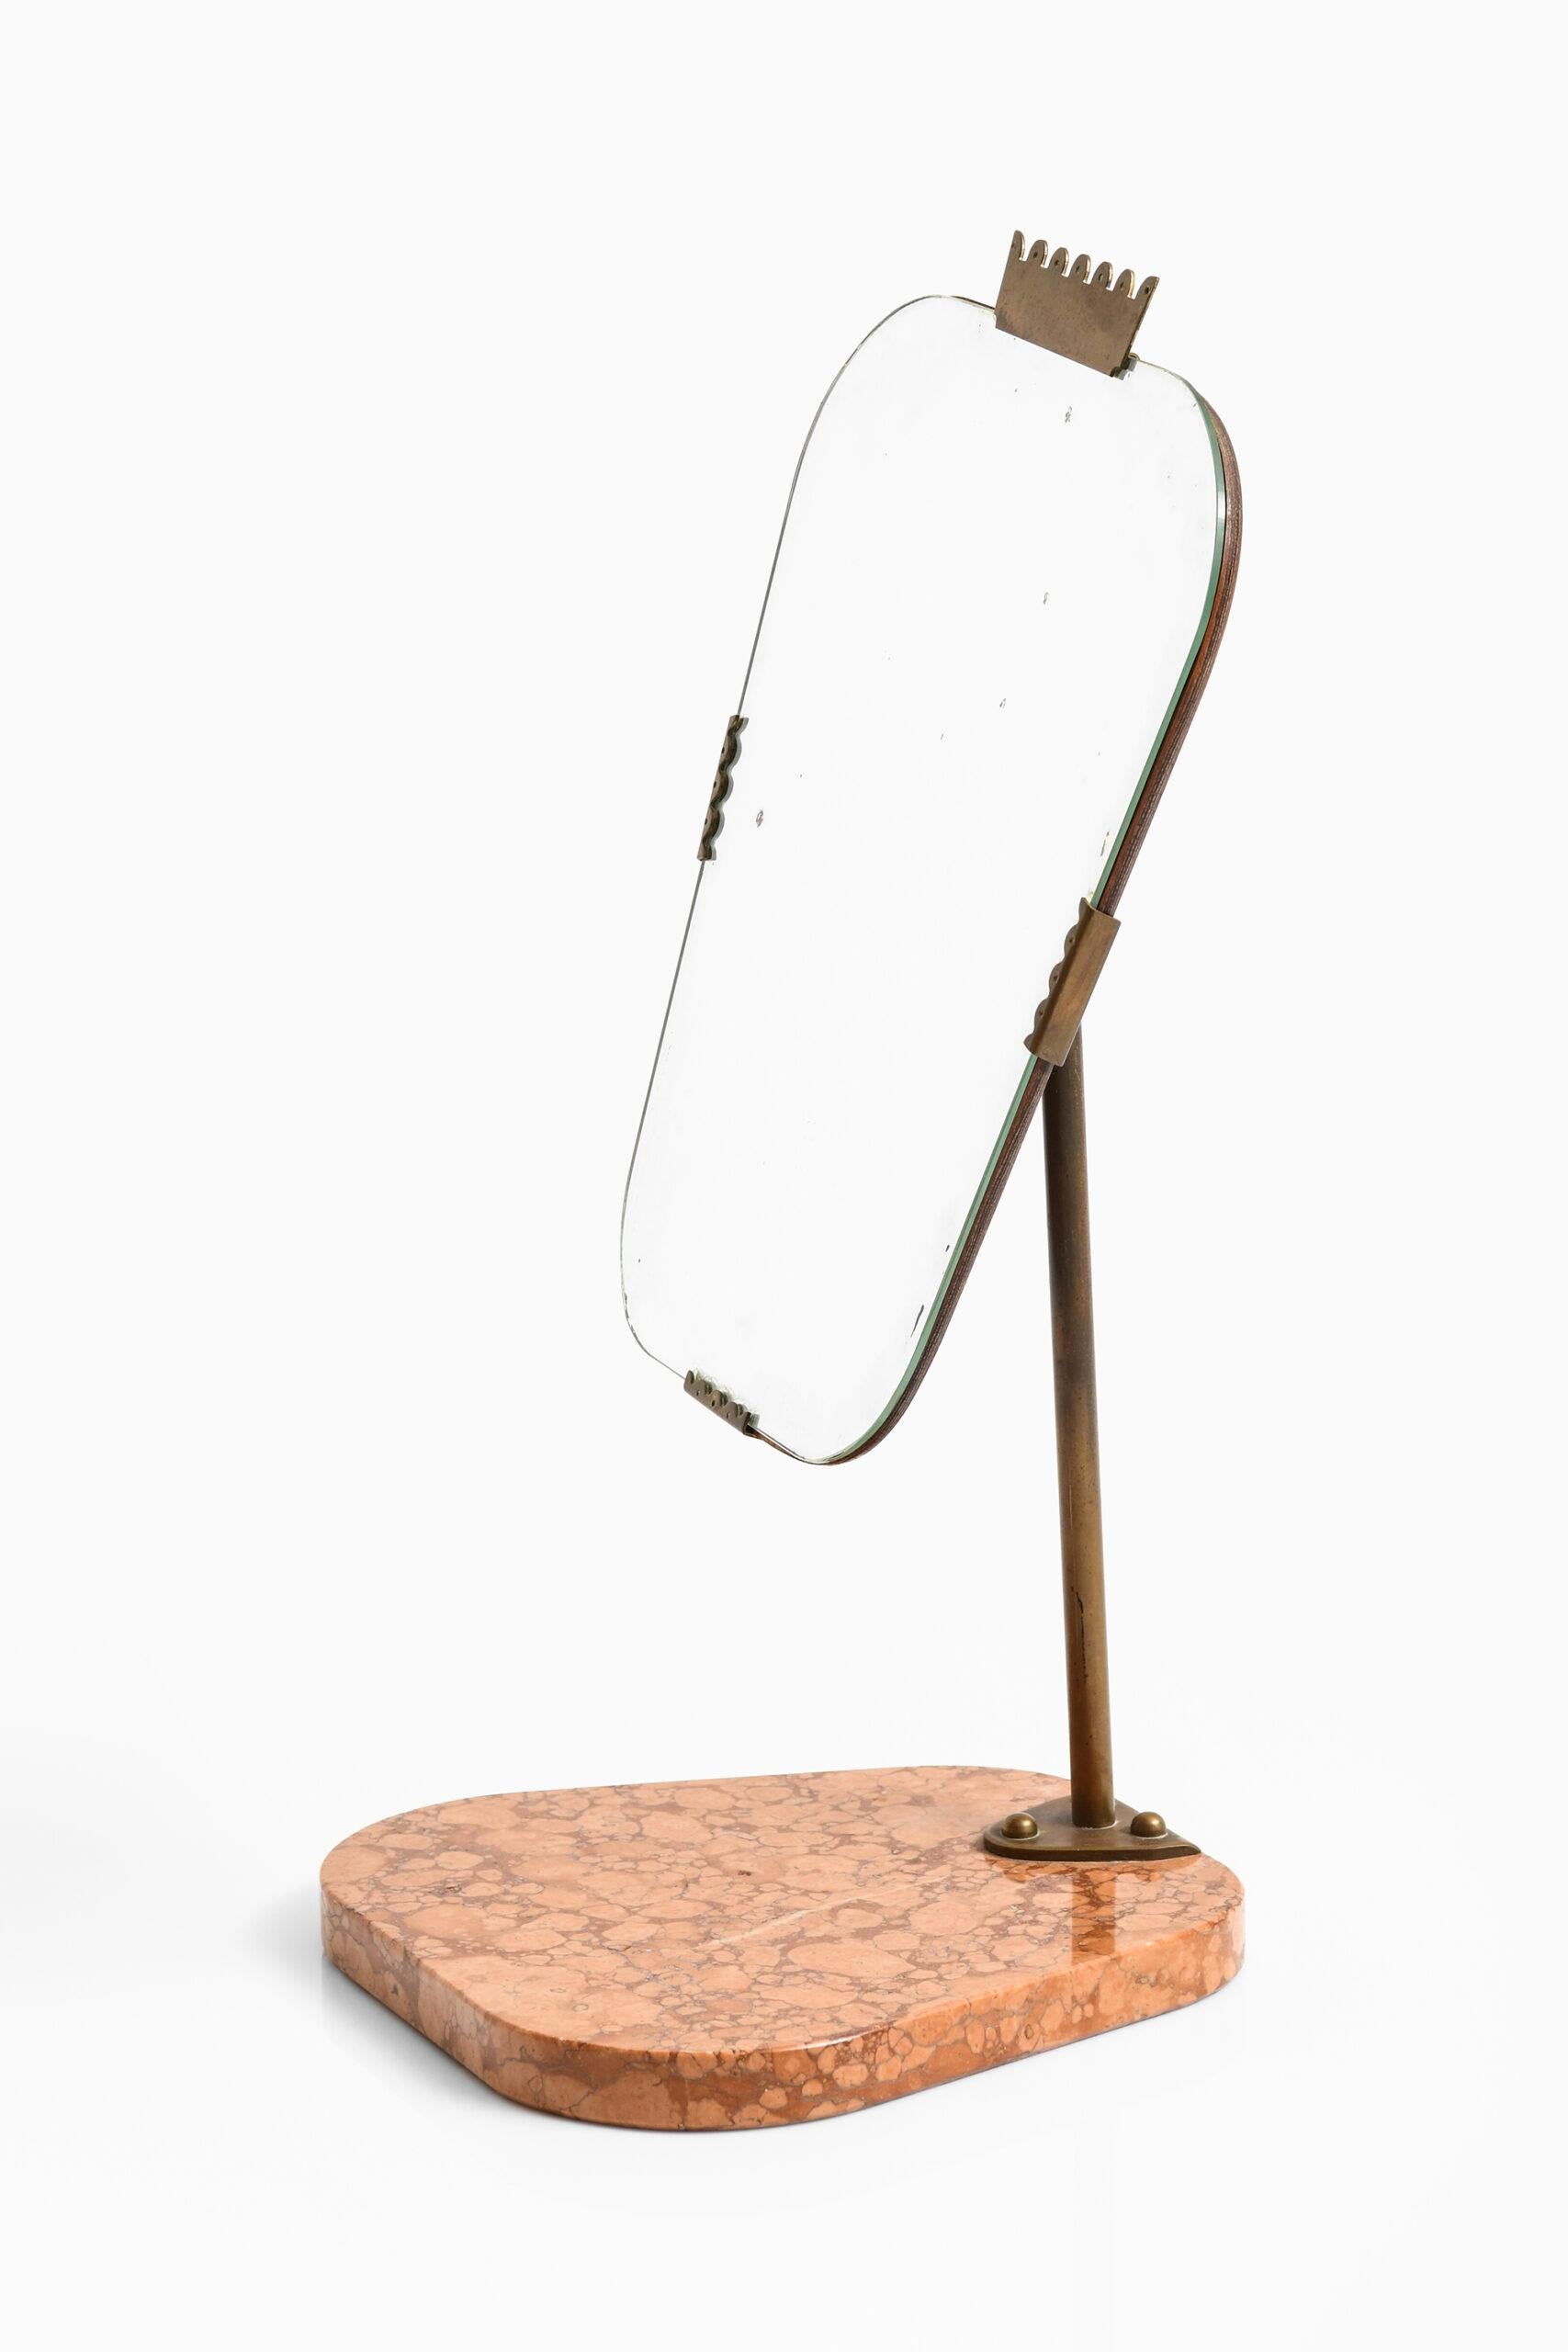 Rare table mirror by unknown designer. Produced in Sweden.